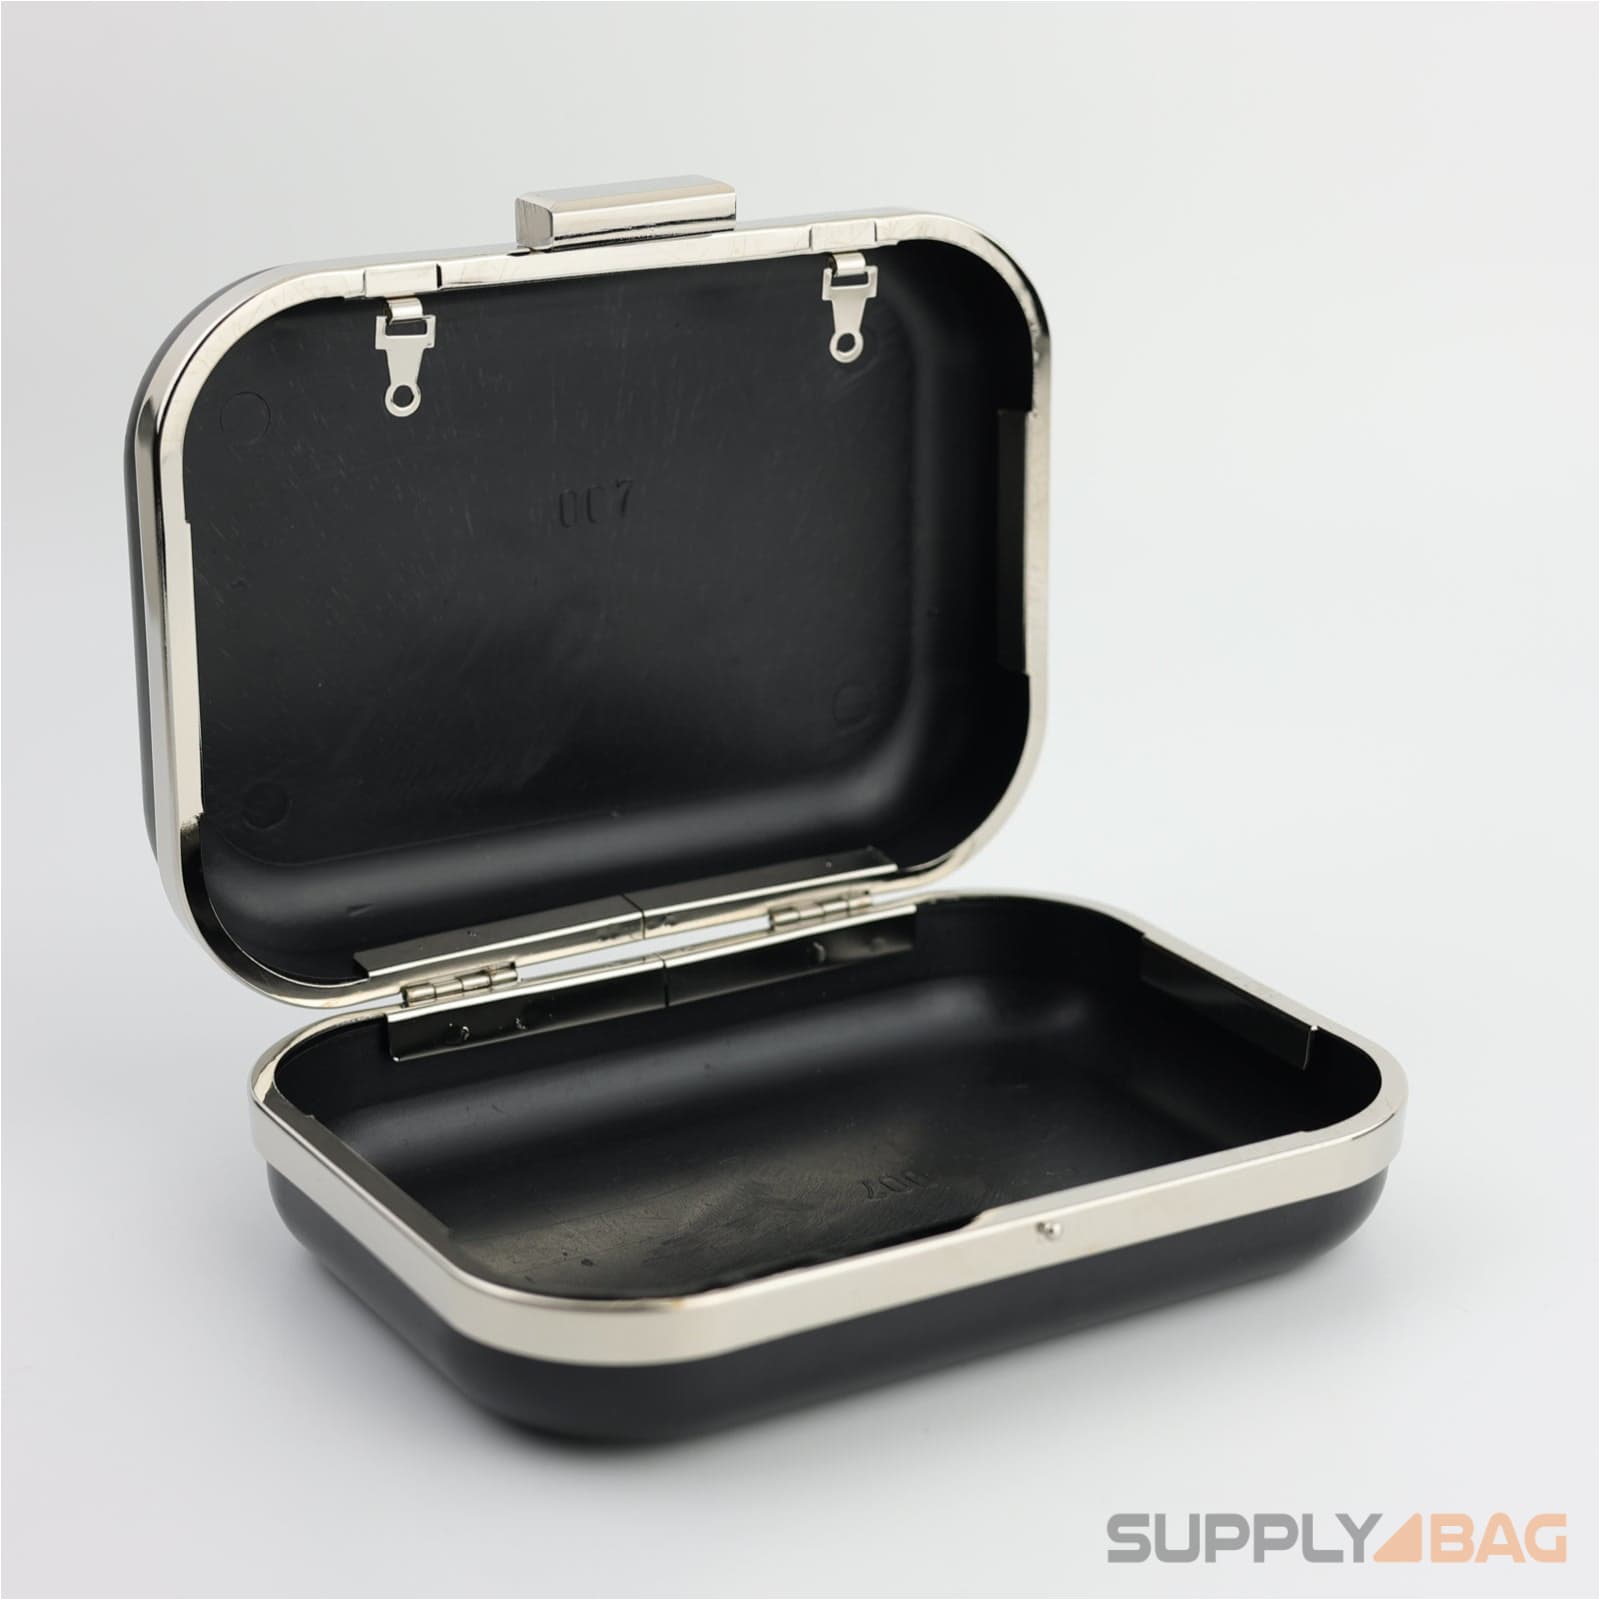 6 x 4.5 inch - Silver Clamshell Clutch Frame with Covers